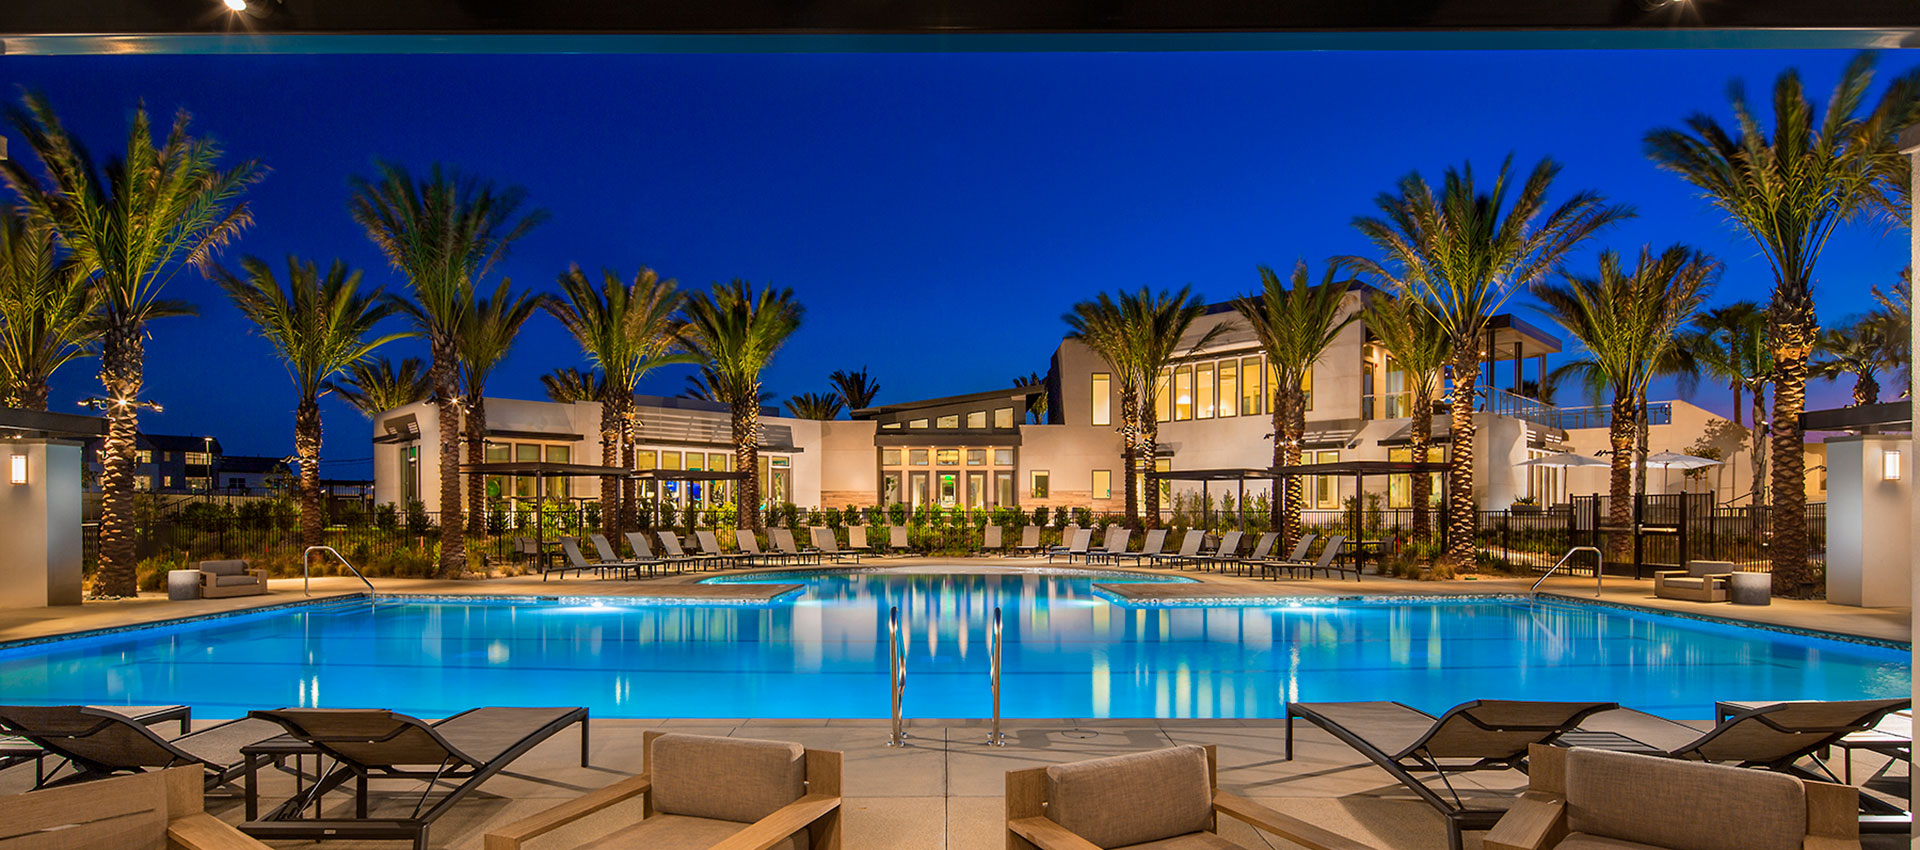 Pool at dusk | The Resort | New Homes in Rancho Cucamonga, CA